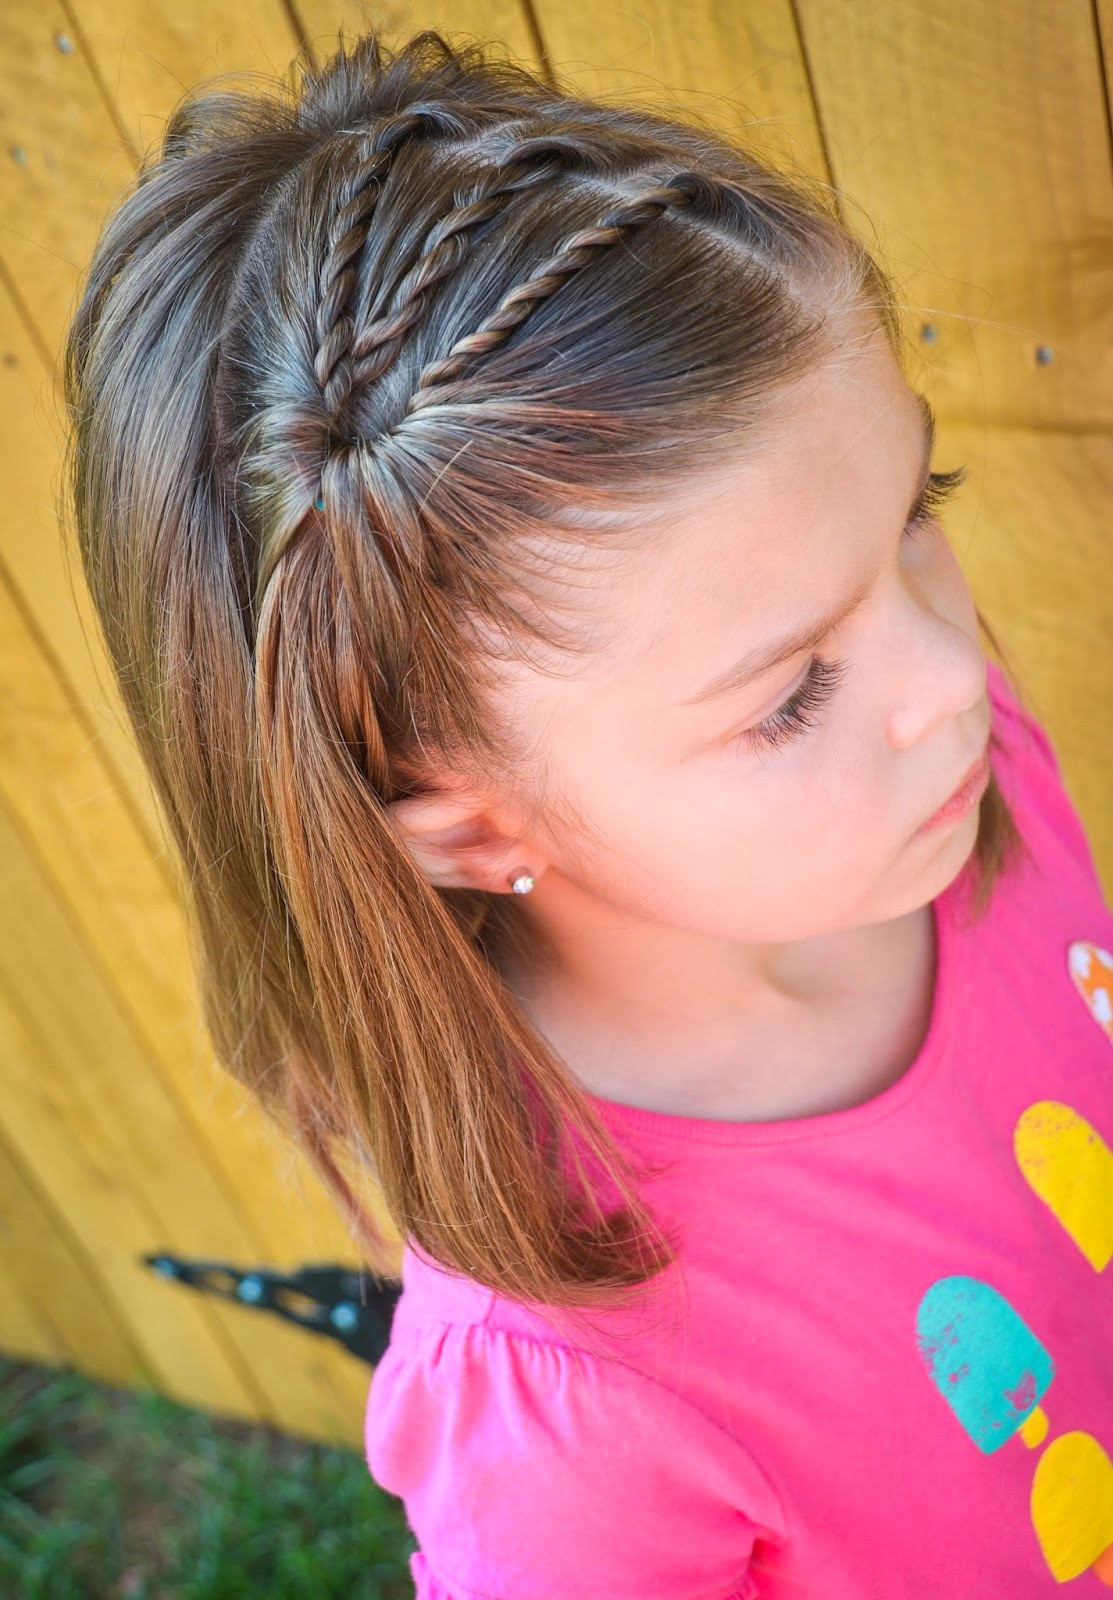 Cute Short Hairstyles For Little Girls
 25 Little Girl Hairstyles you can do YOURSELF